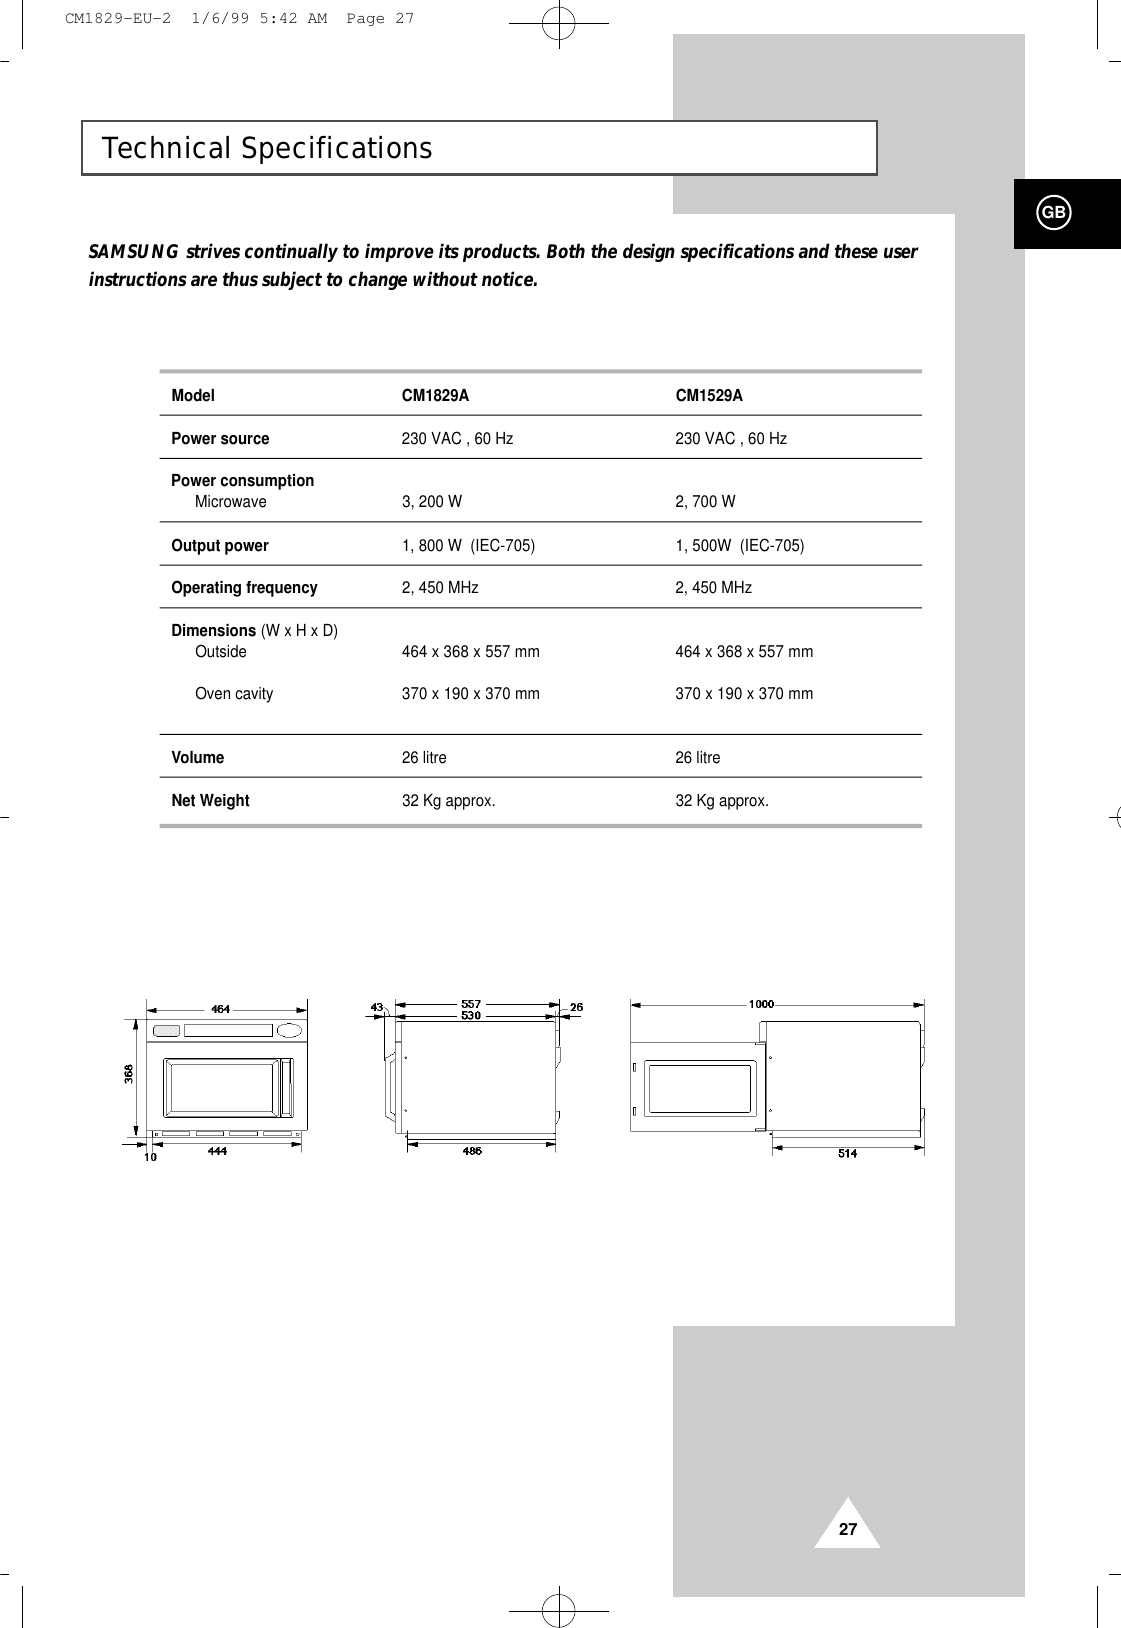 27GBTechnical SpecificationsSAMSUNG strives continually to improve its products. Both the design specifications and these user         instructions are thus subject to change without notice.Model CM1829A CM1529APower source 230 VAC , 60 Hz  230 VAC , 60 Hz Power consumptionMicrowave 3, 200 W 2, 700 WOutput power 1, 800 W  (IEC-705) 1, 500W  (IEC-705)Operating frequency 2, 450 MHz 2, 450 MHzDimensions (W x H x D)Outside  464 x 368 x 557 mm 464 x 368 x 557 mmOven cavity 370 x 190 x 370 mm 370 x 190 x 370 mmVolume  26 litre 26 litreNet Weight 32 Kg approx. 32 Kg approx.CM1829-EU-2  1/6/99 5:42 AM  Page 27